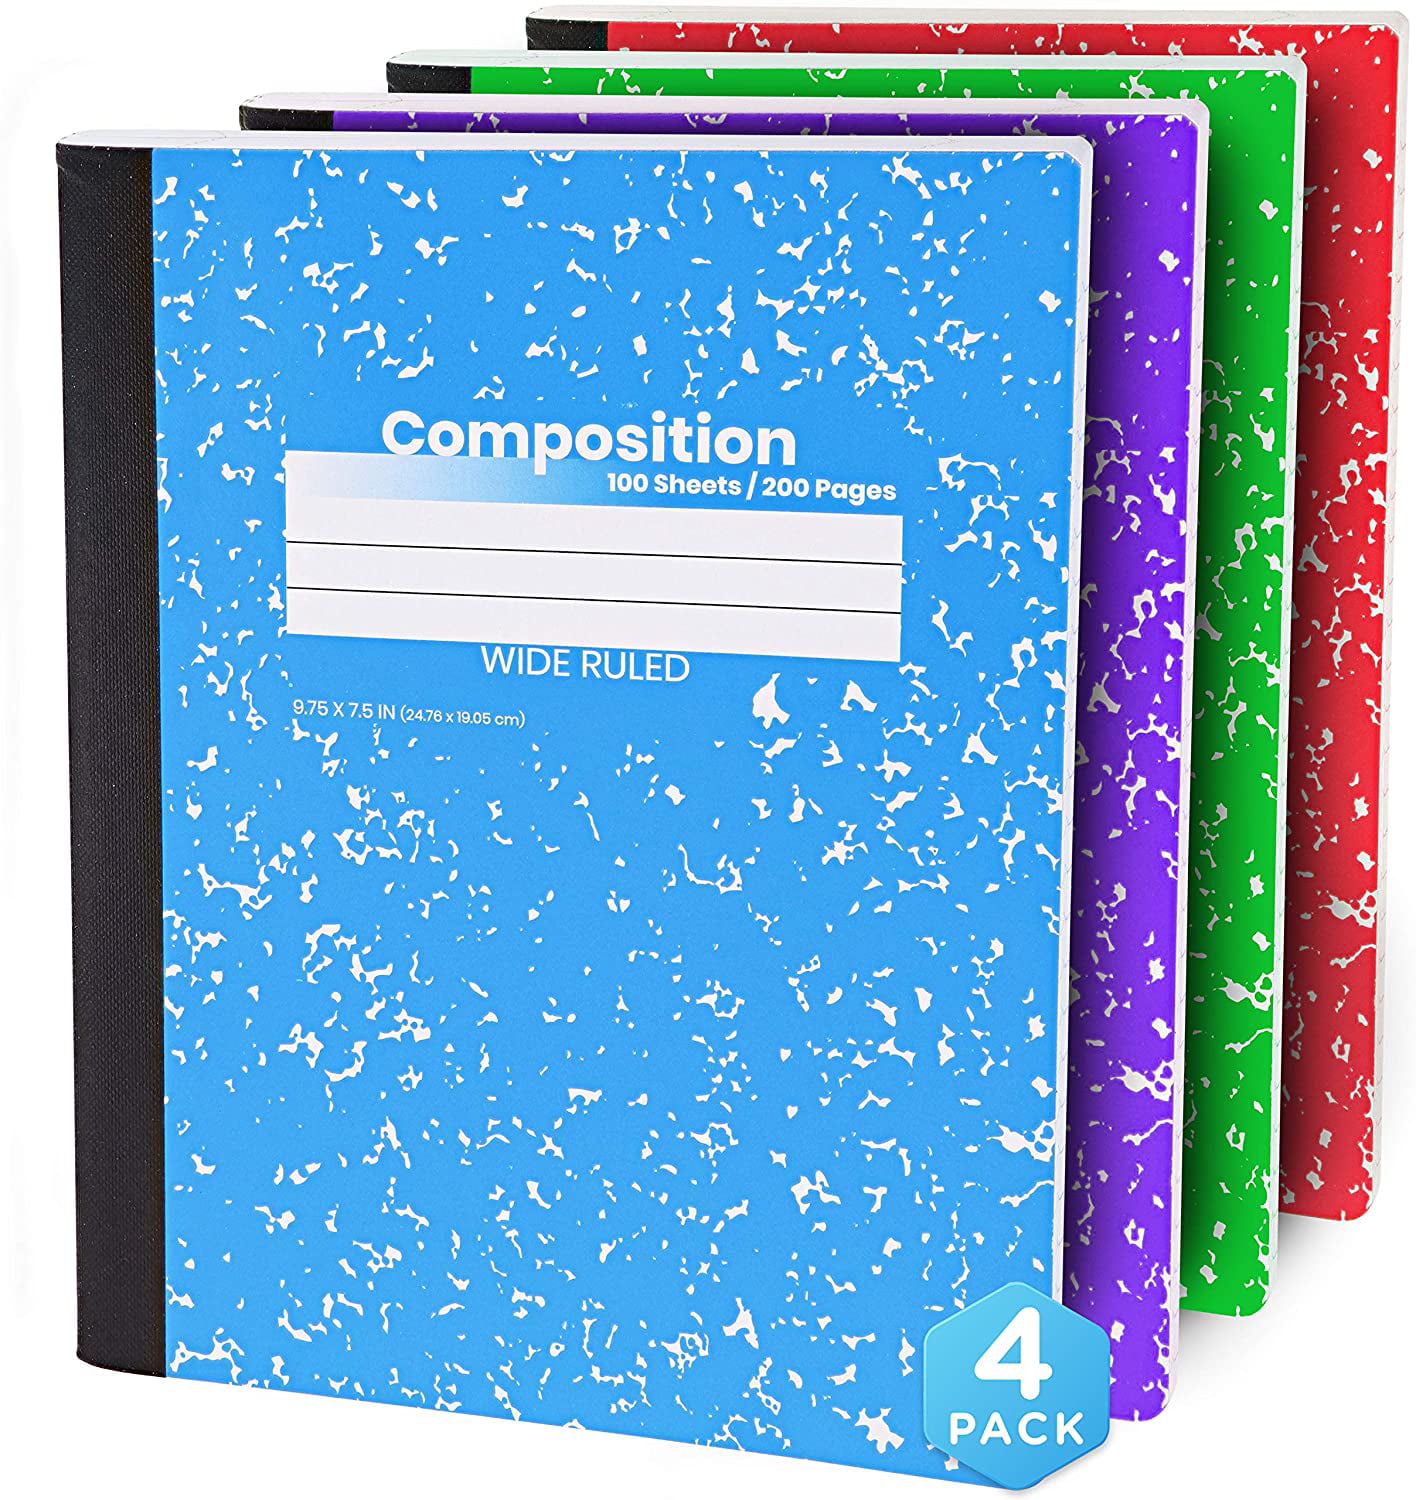 Composition Notebook Wide Ruled 100 Sheets 200 Pages School Planner 5 Notebooks